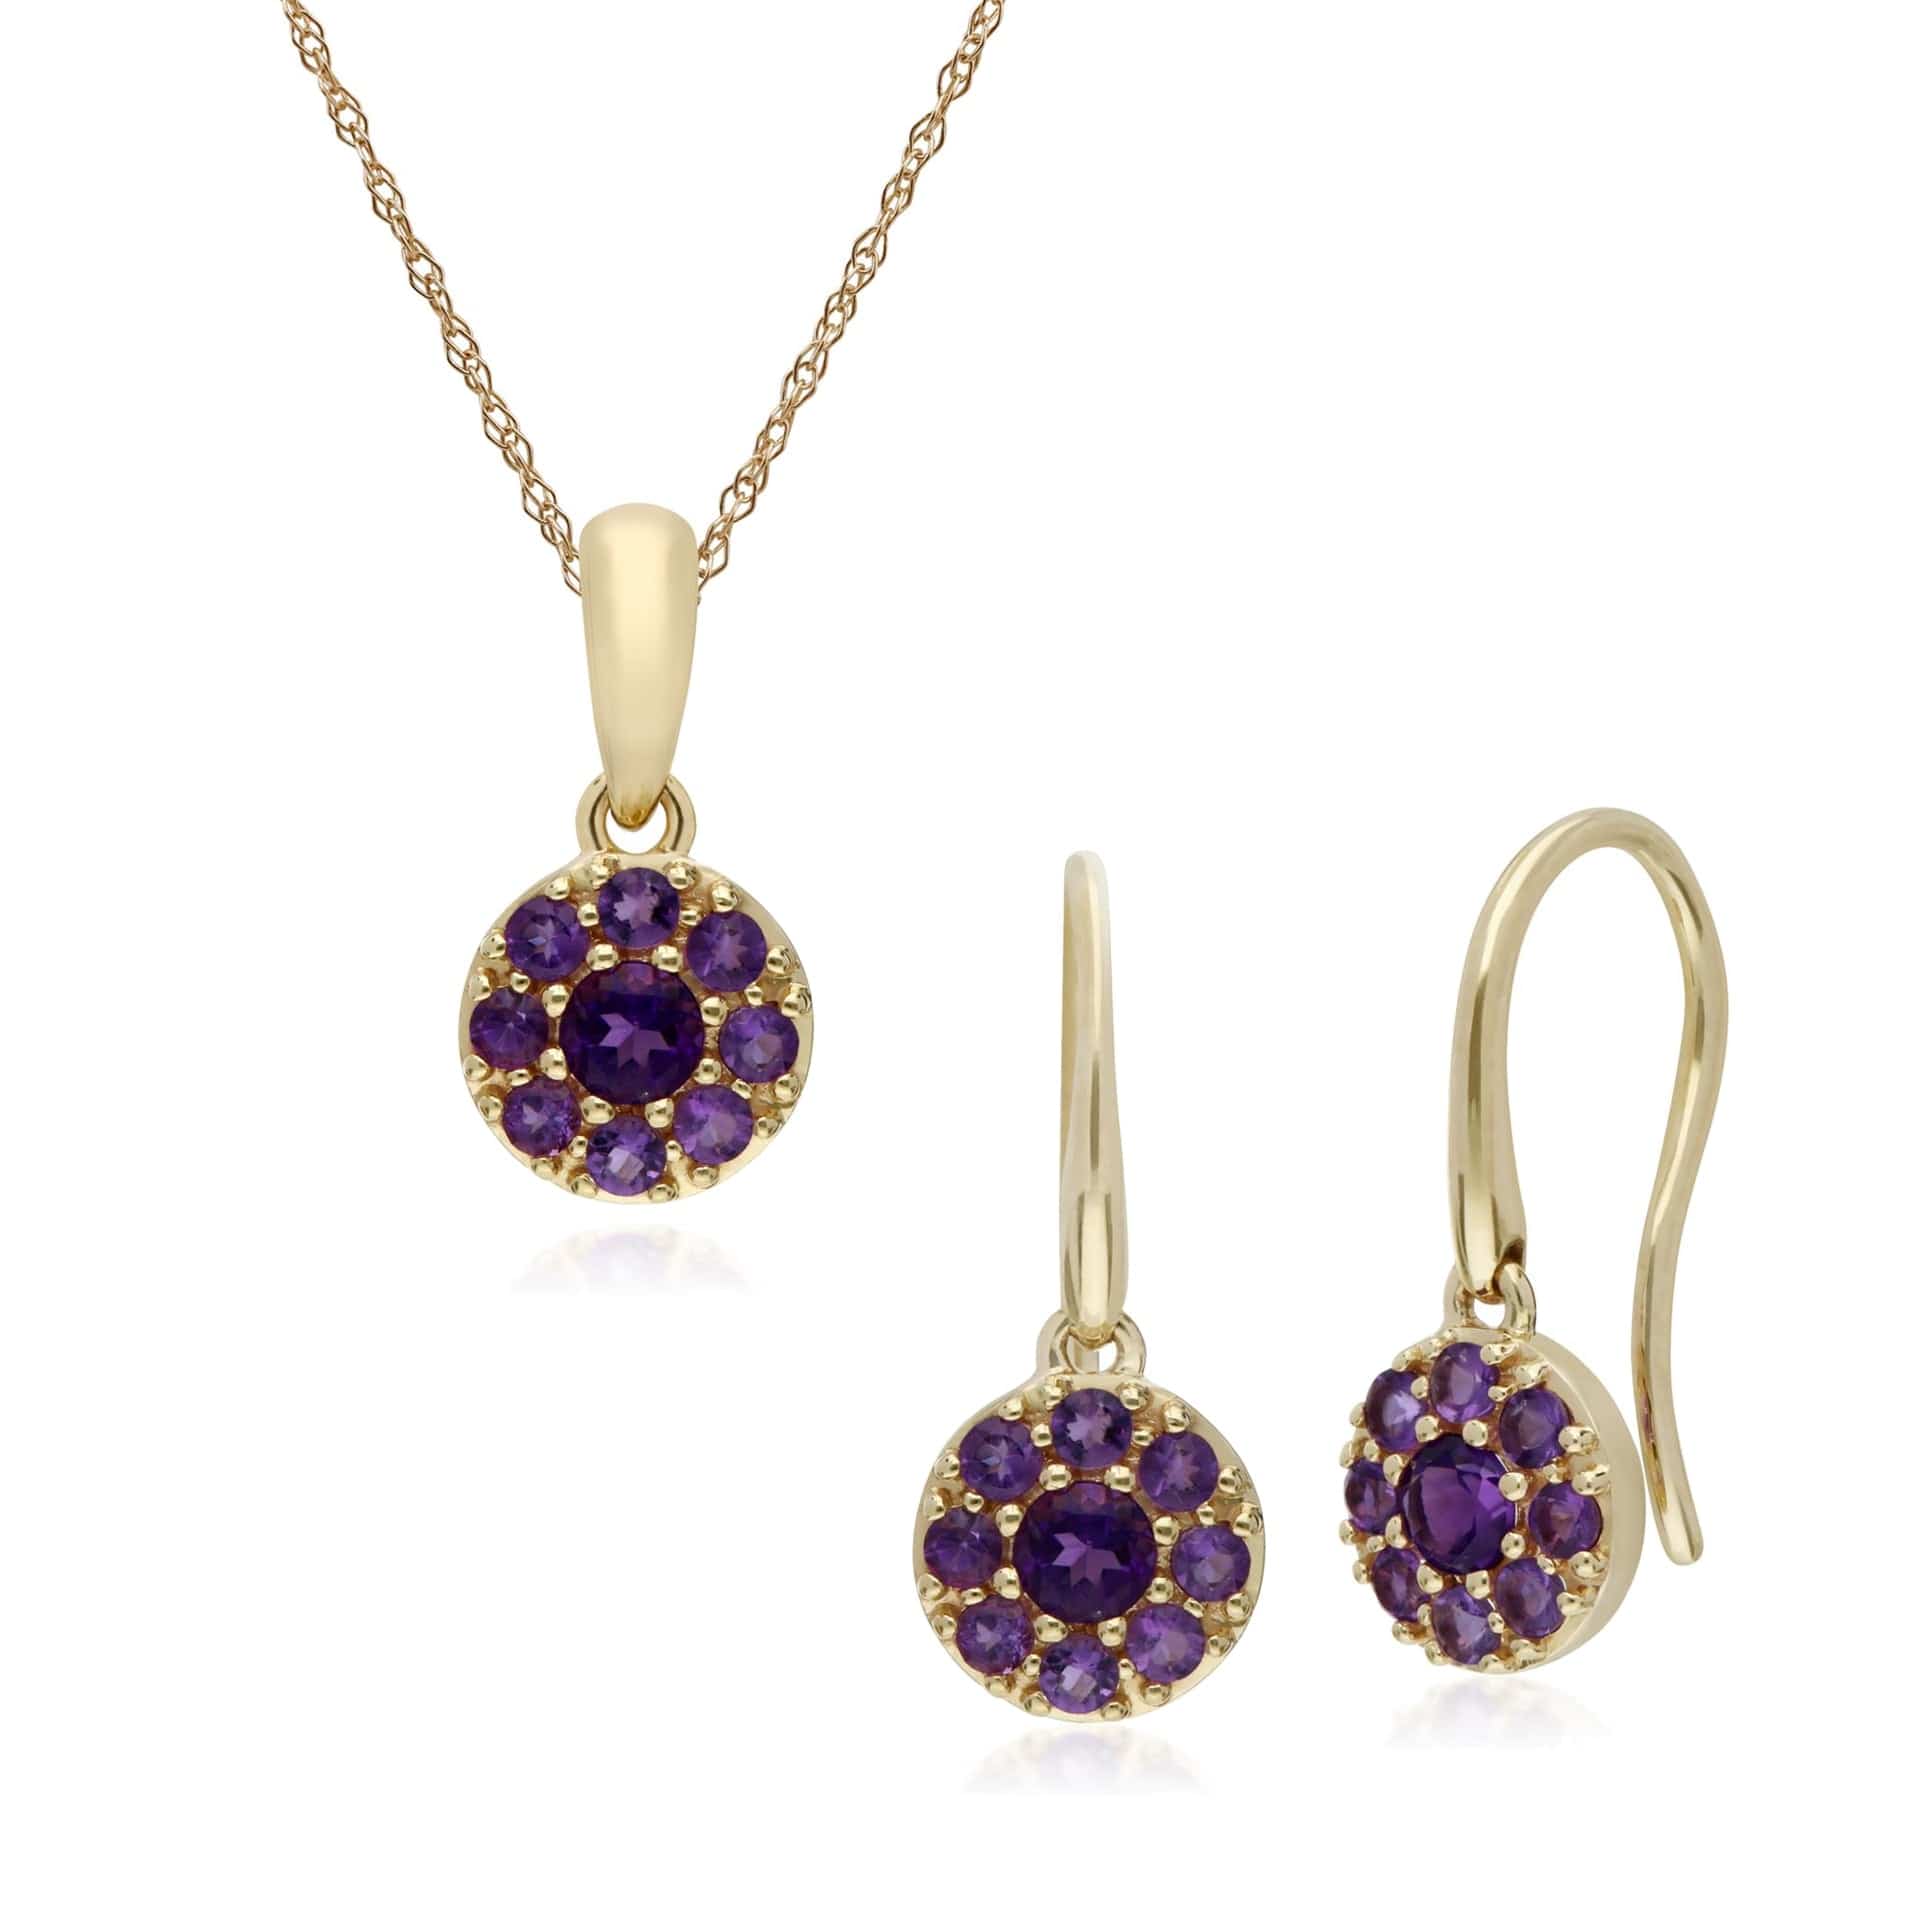 135E1573049-135P1910049 Classic Round Amethyst Cluster Drop Earrings & Pendant Set in 9ct Yellow Gold 1